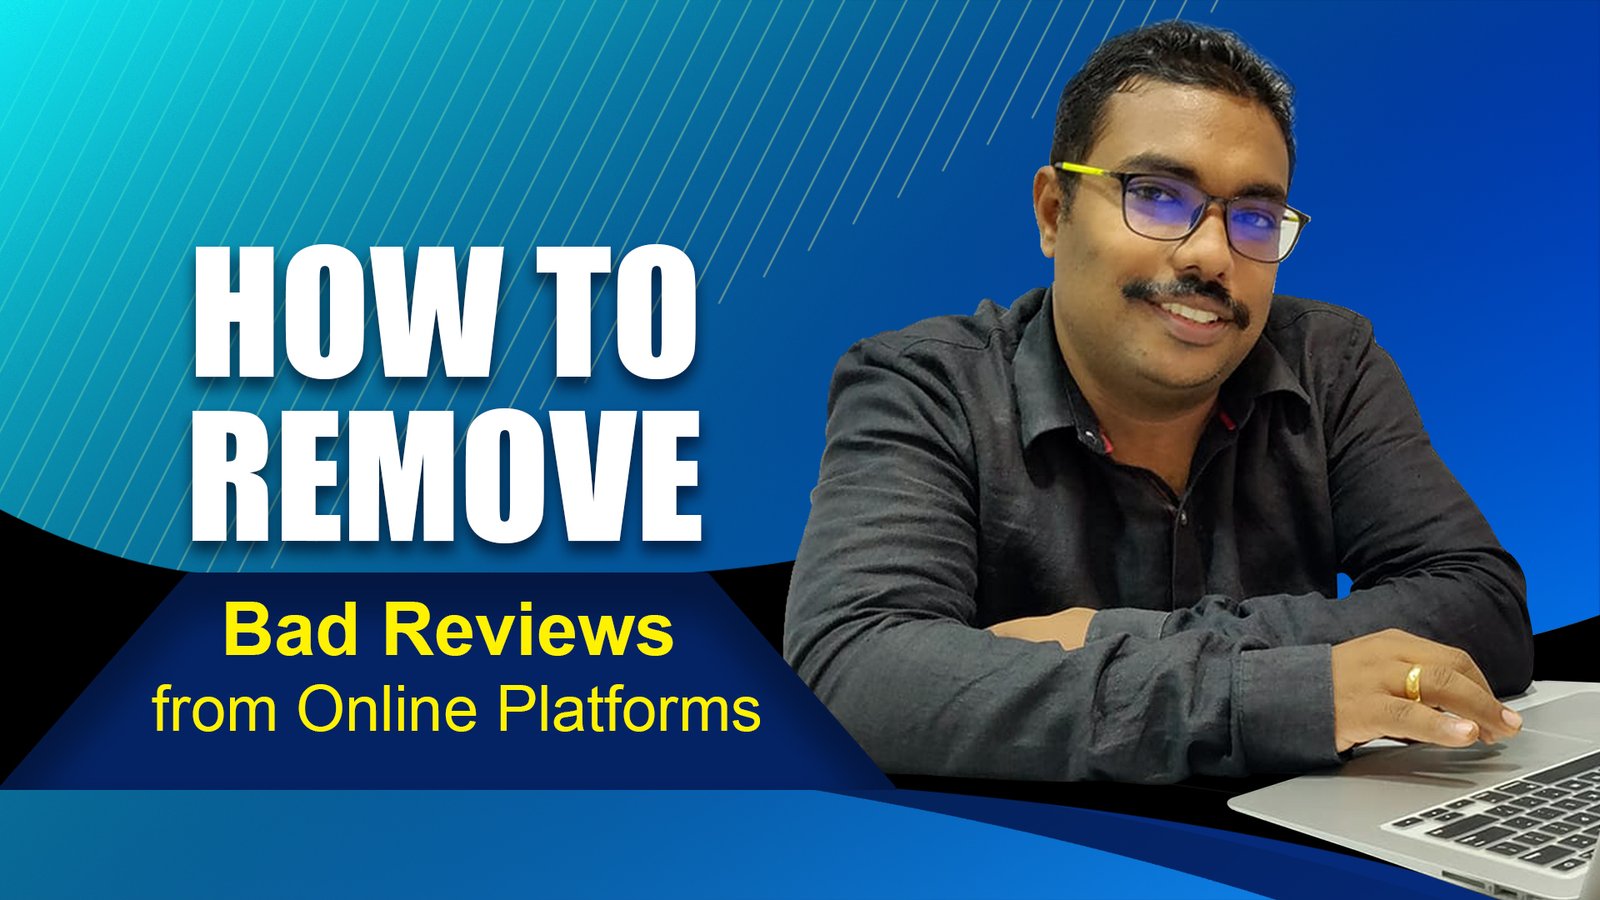 How to Remove Bad Reviews From Online Platforms